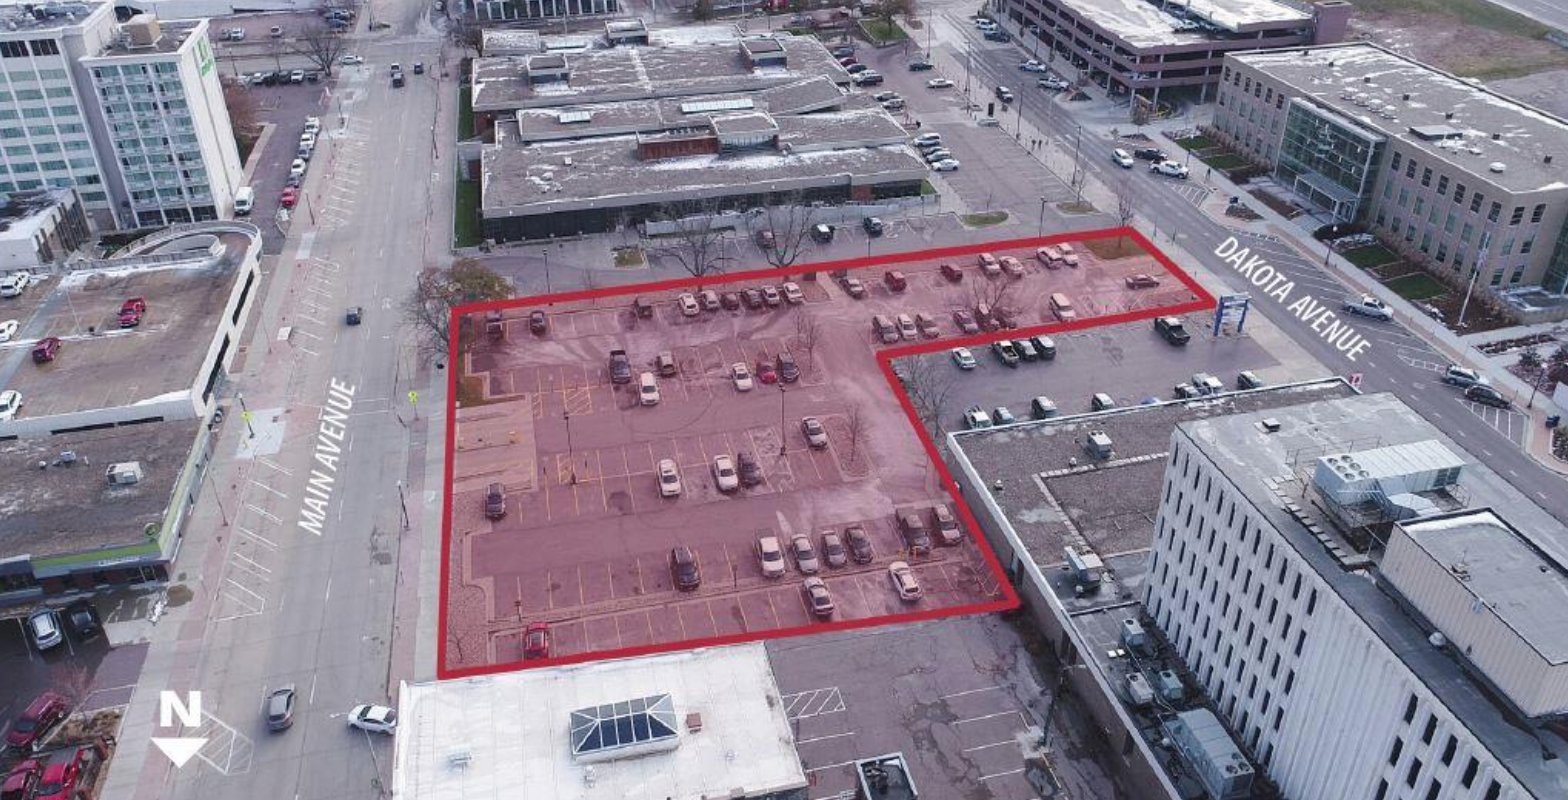 City sees 'strong interest' in developing downtown surface lots